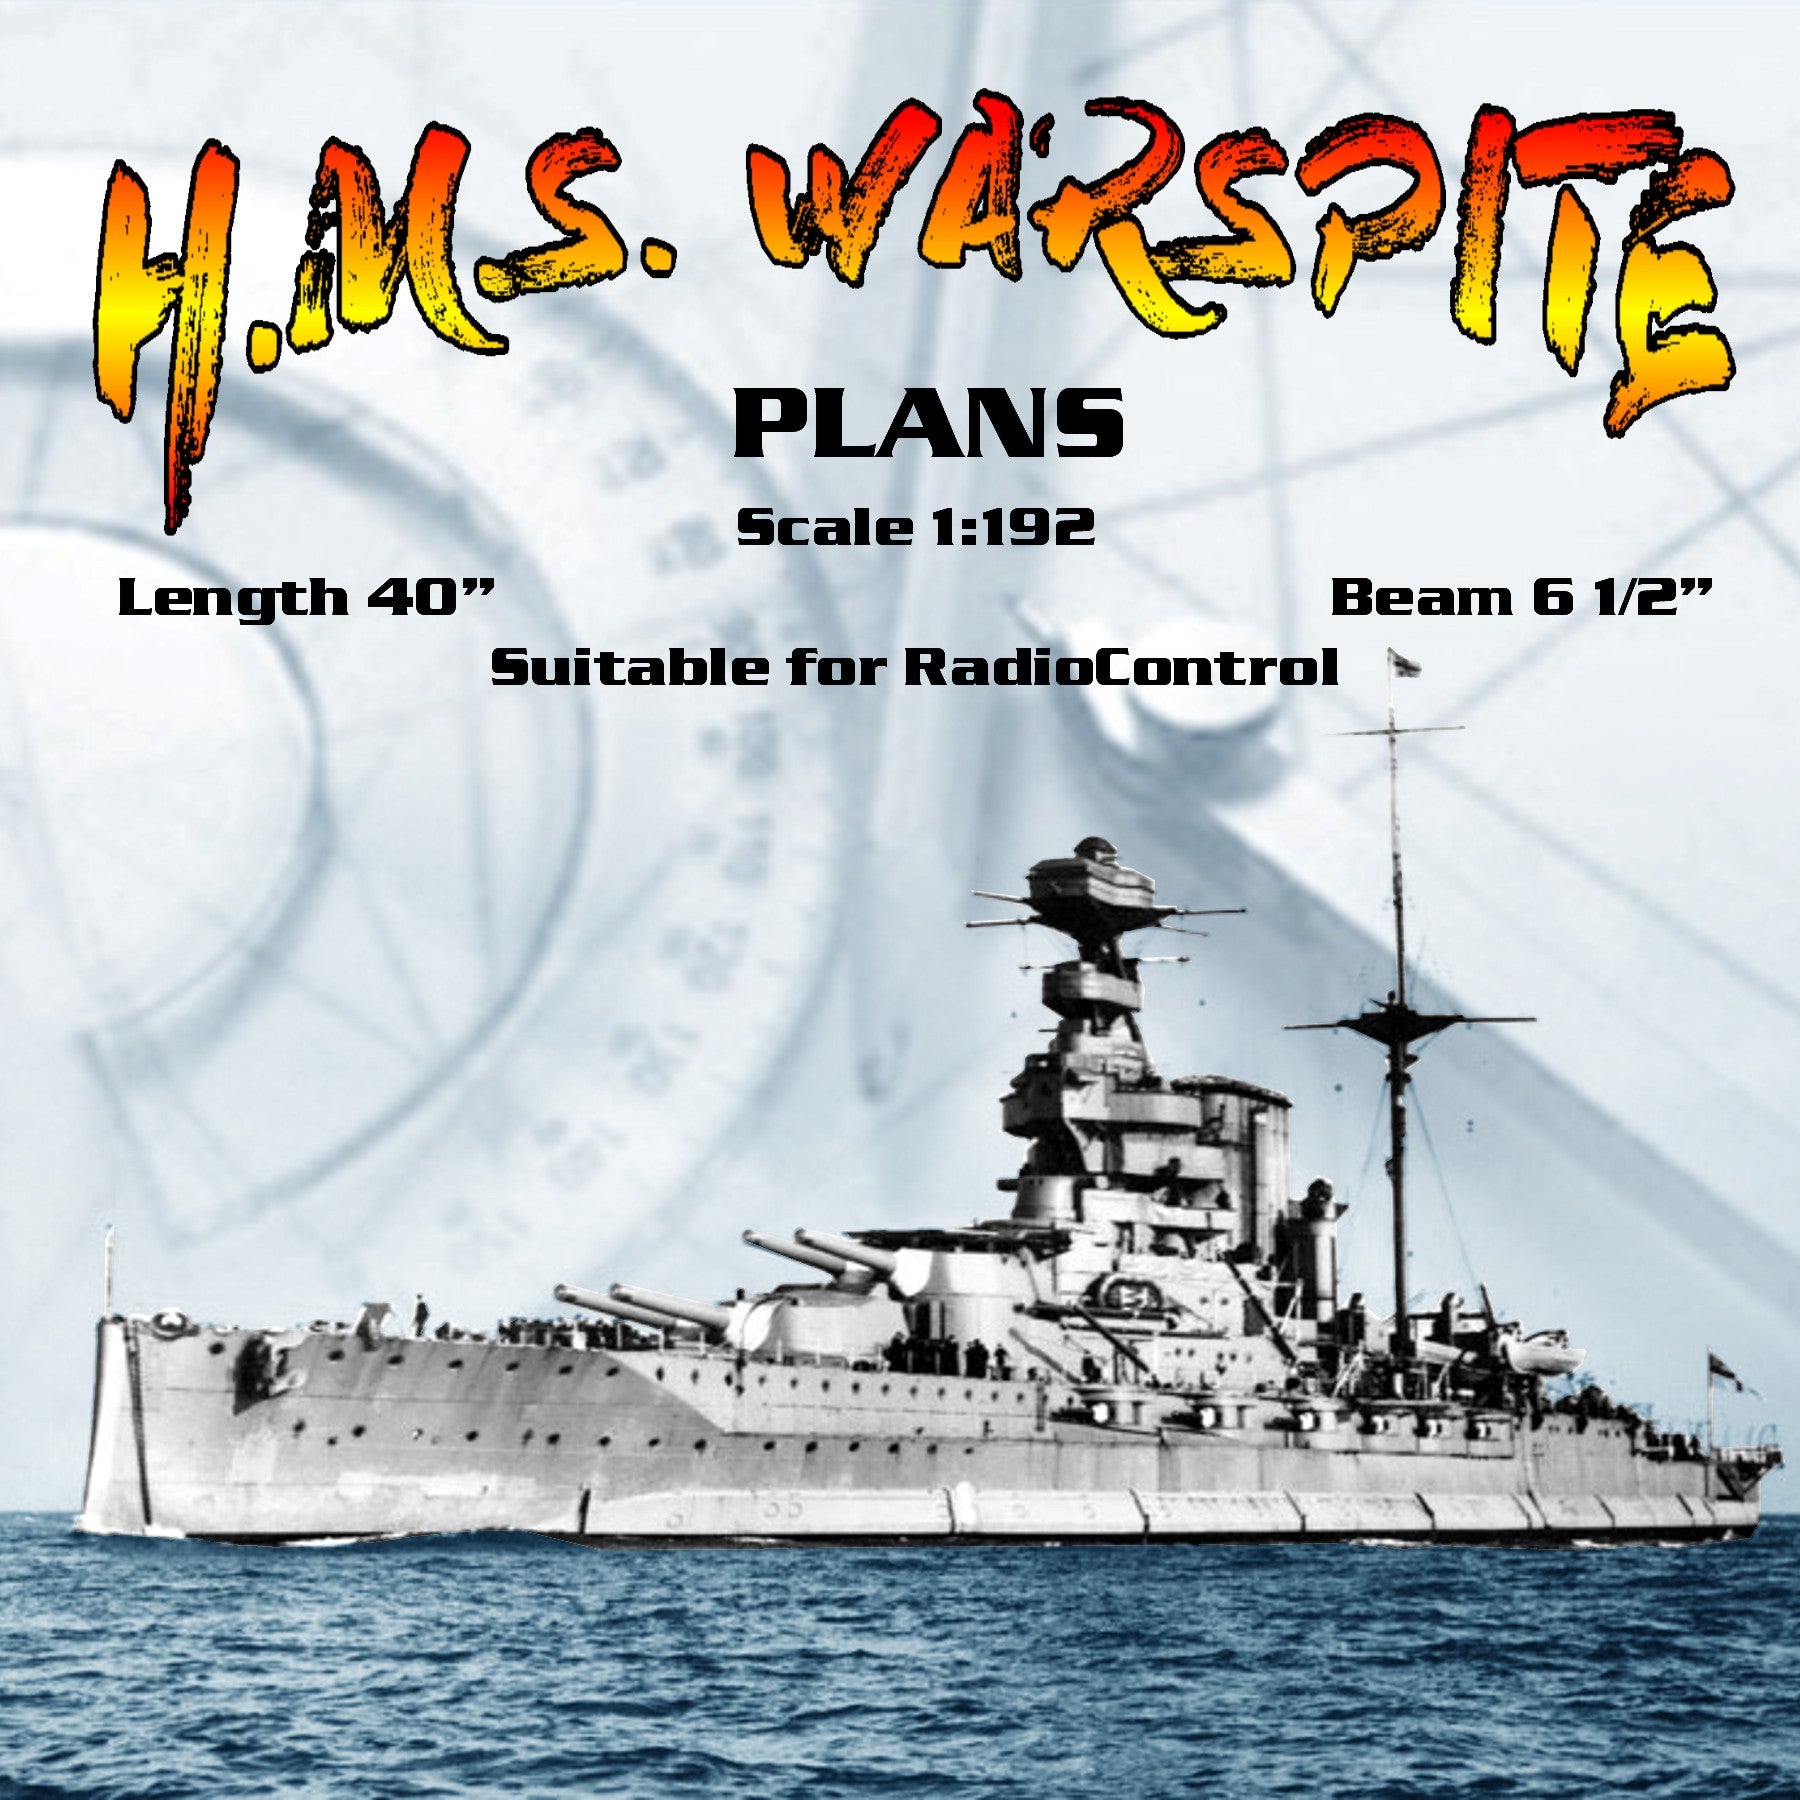 full size printed plans  scale 1:192 battleship  l 40" suitable for radio control